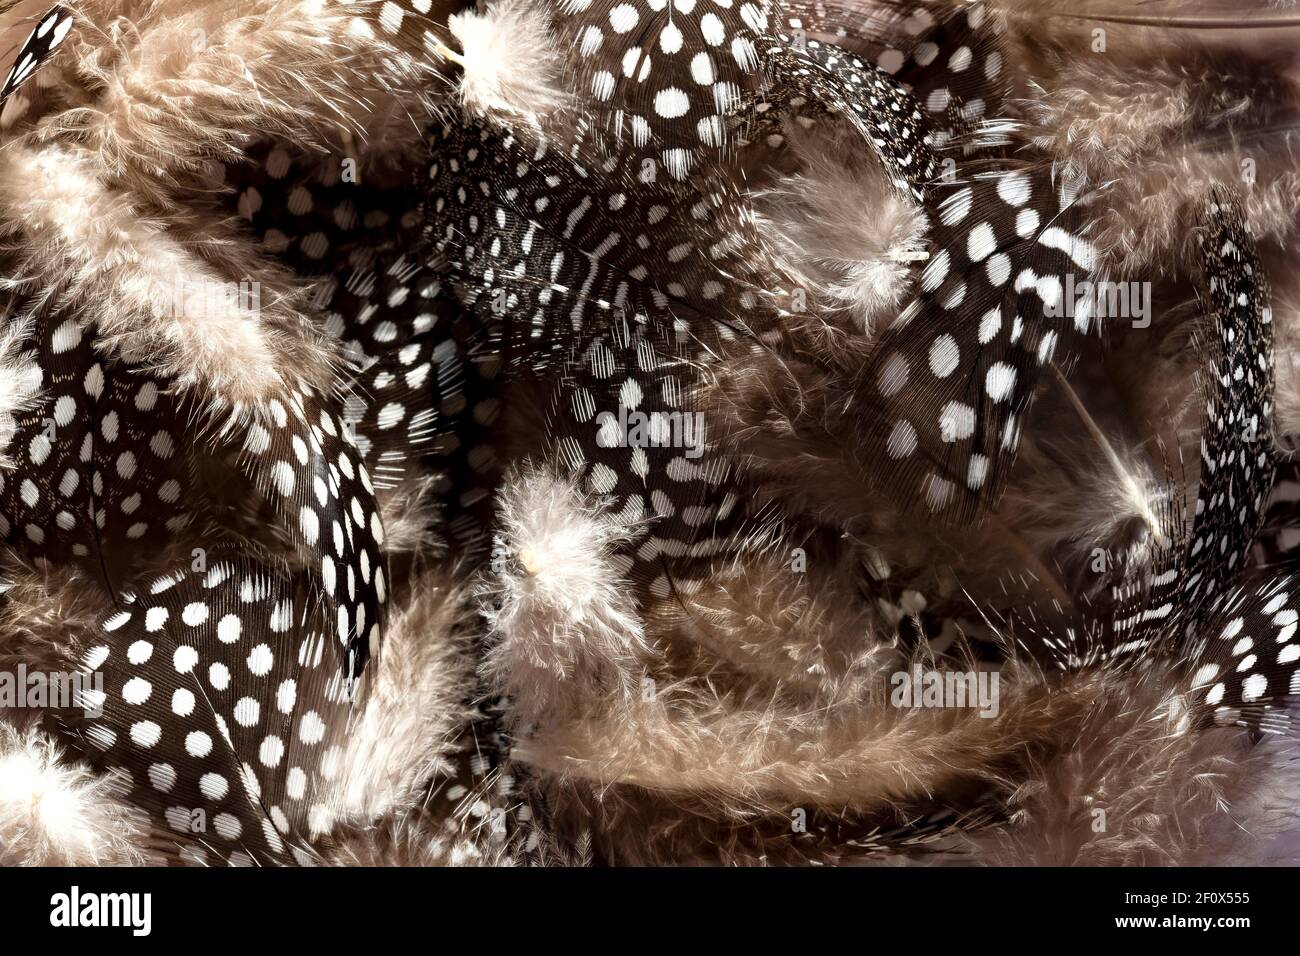 Quill feathers close up as background Stock Photo